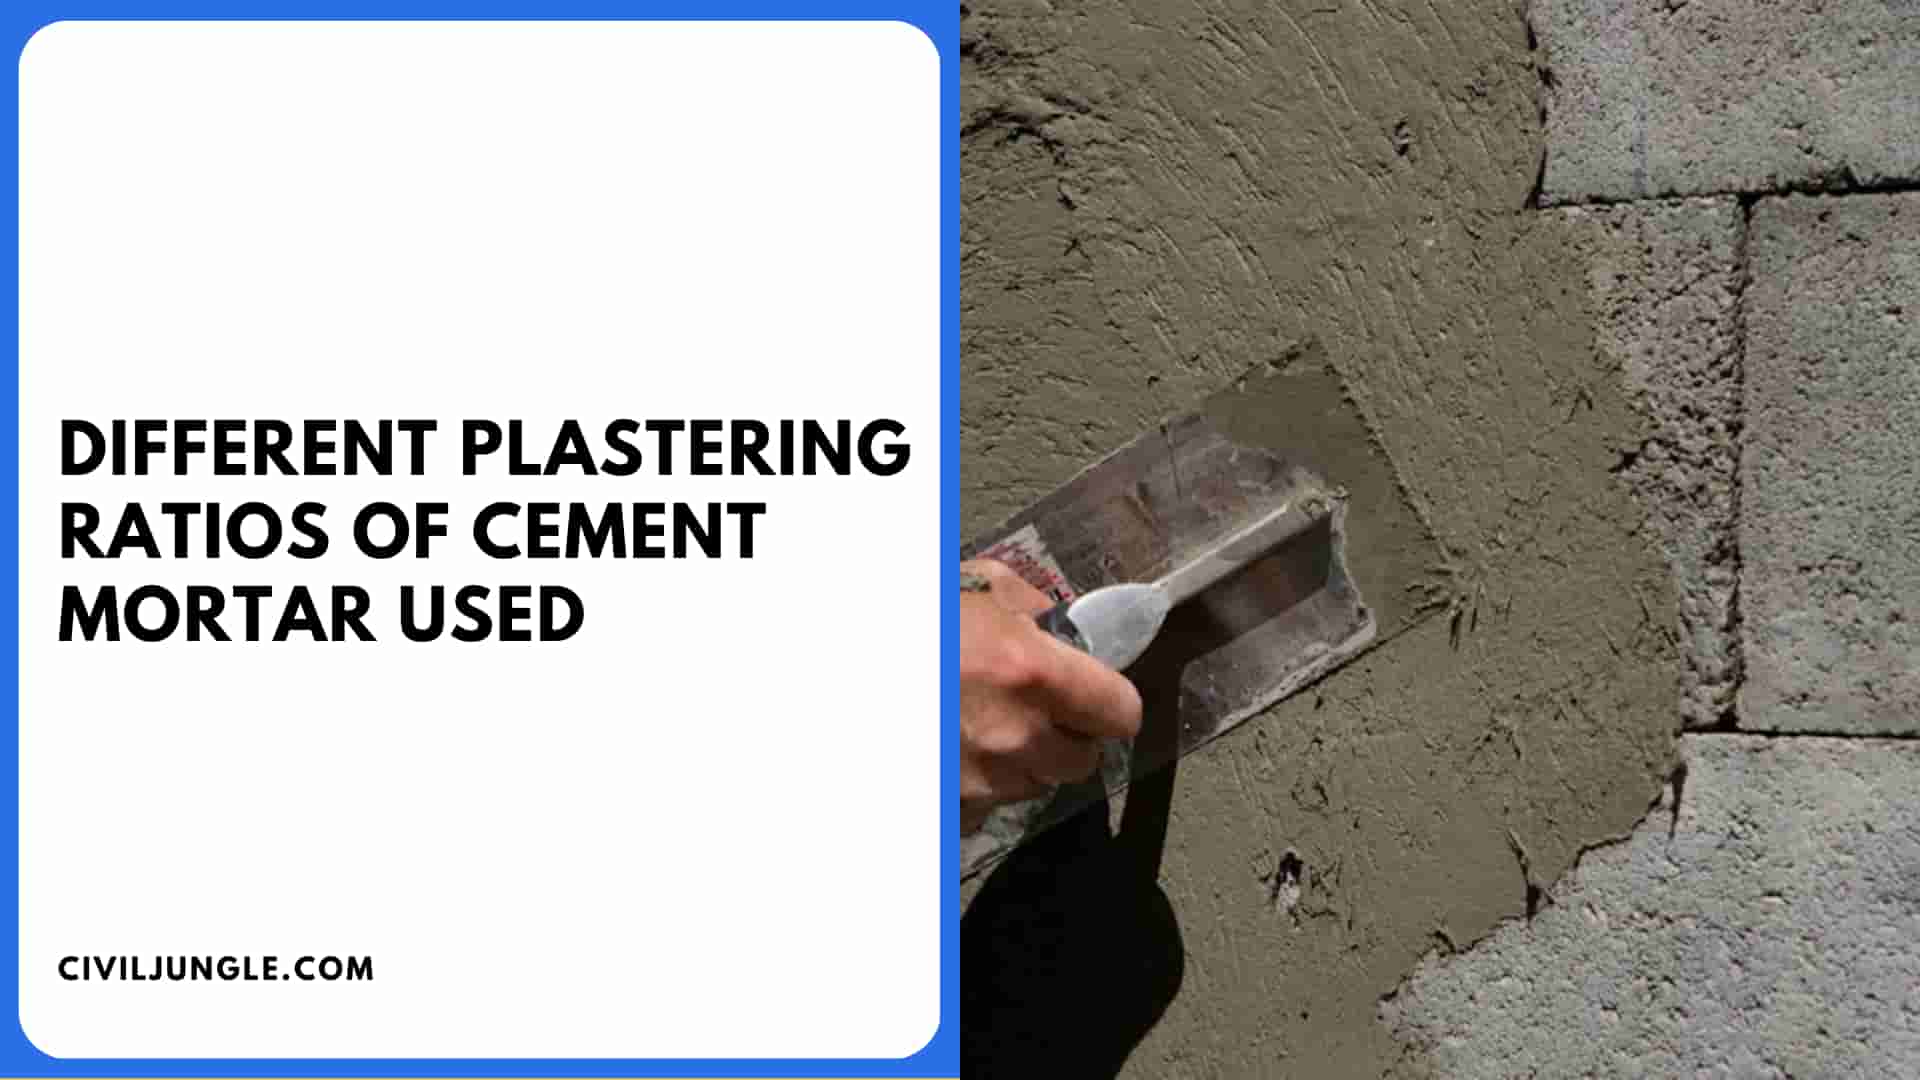 Different Plastering Ratios of Cement Mortar Used